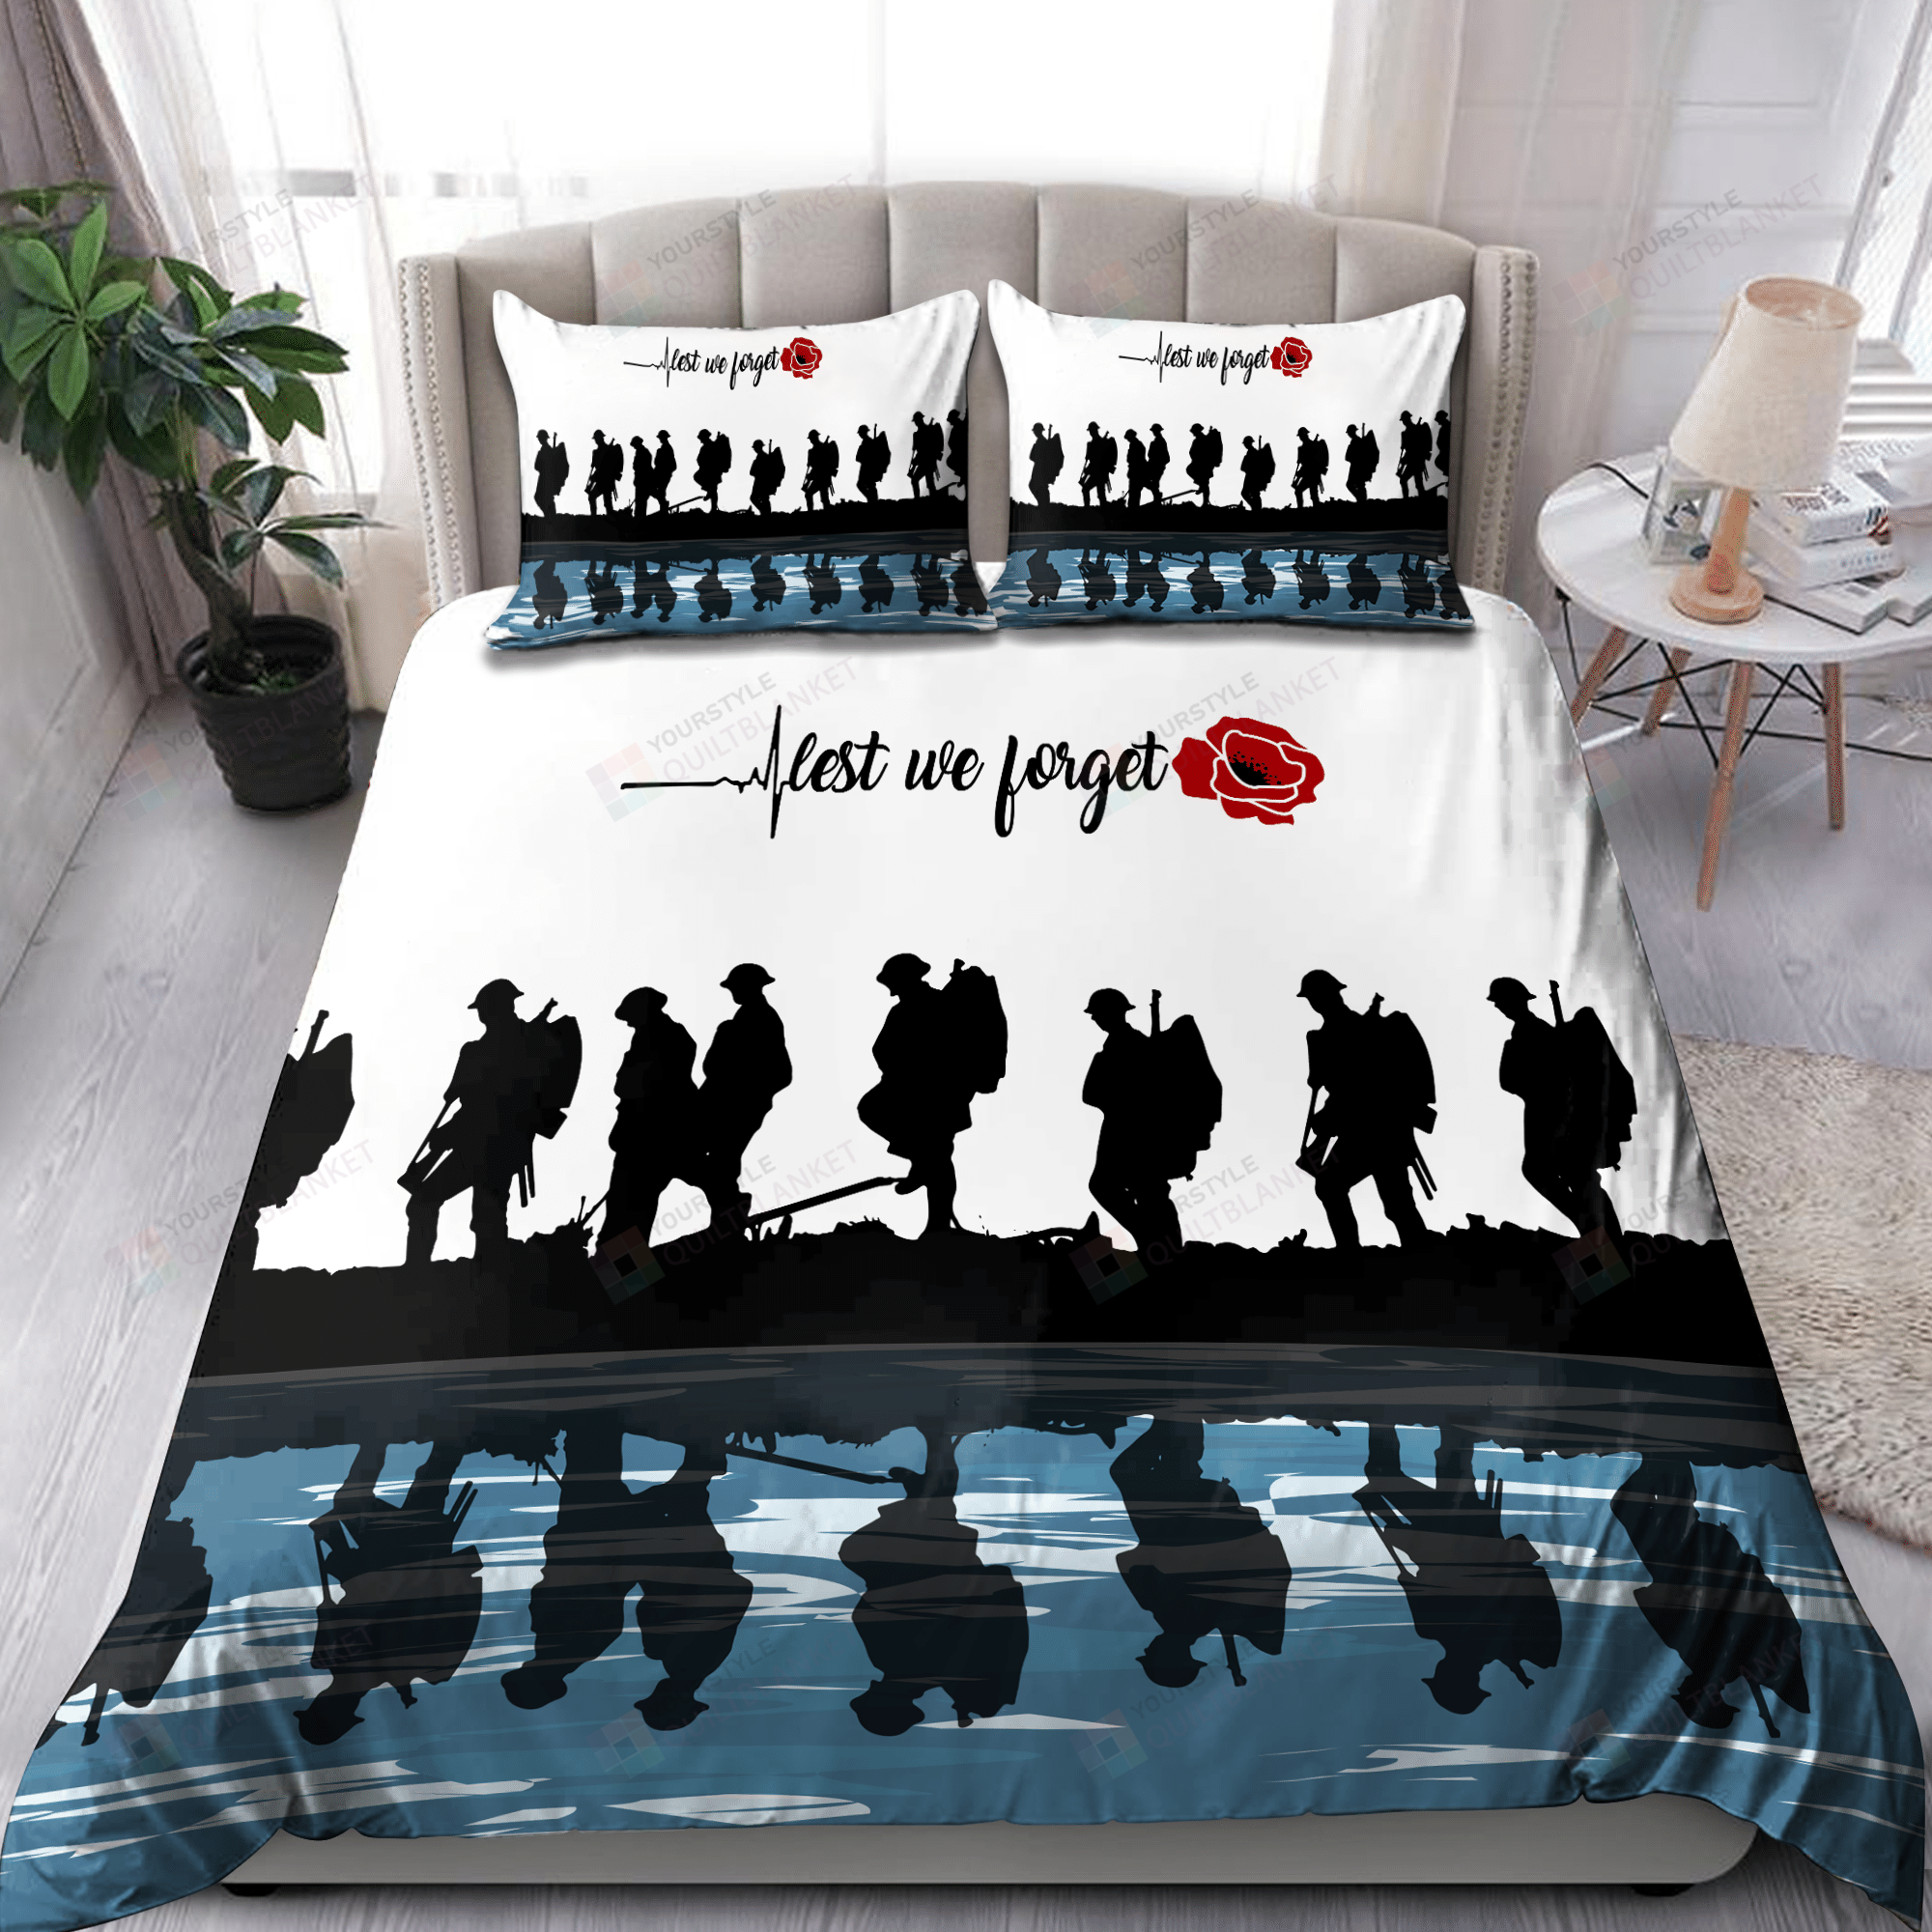 Lest We Forget Honor The Fallen Uk Veteran Bed Sheets Duvet Cover Bedding Set Great Gift For Veteran's Day.png